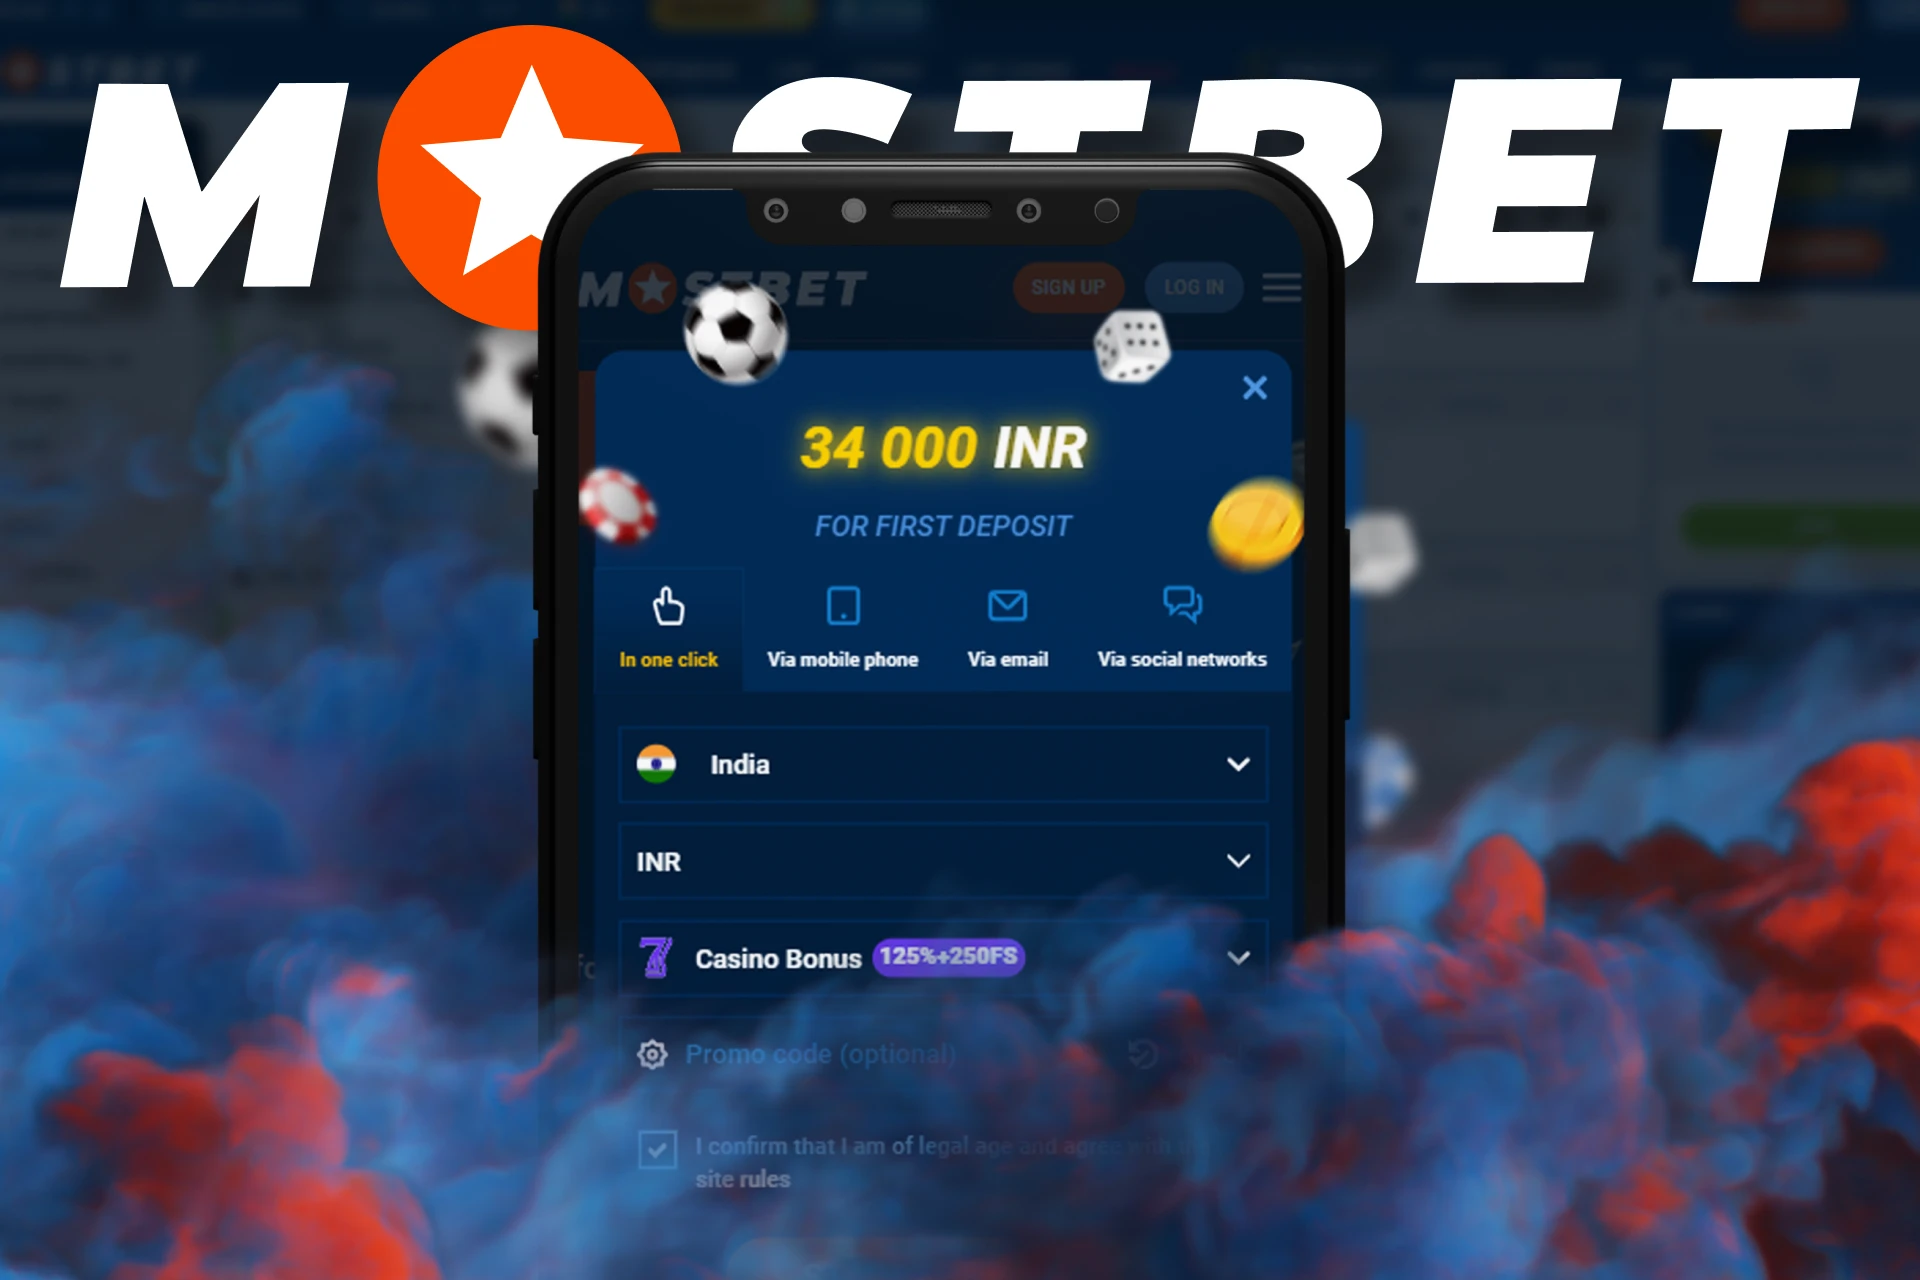 You can create the Mostbet account via the phone app.